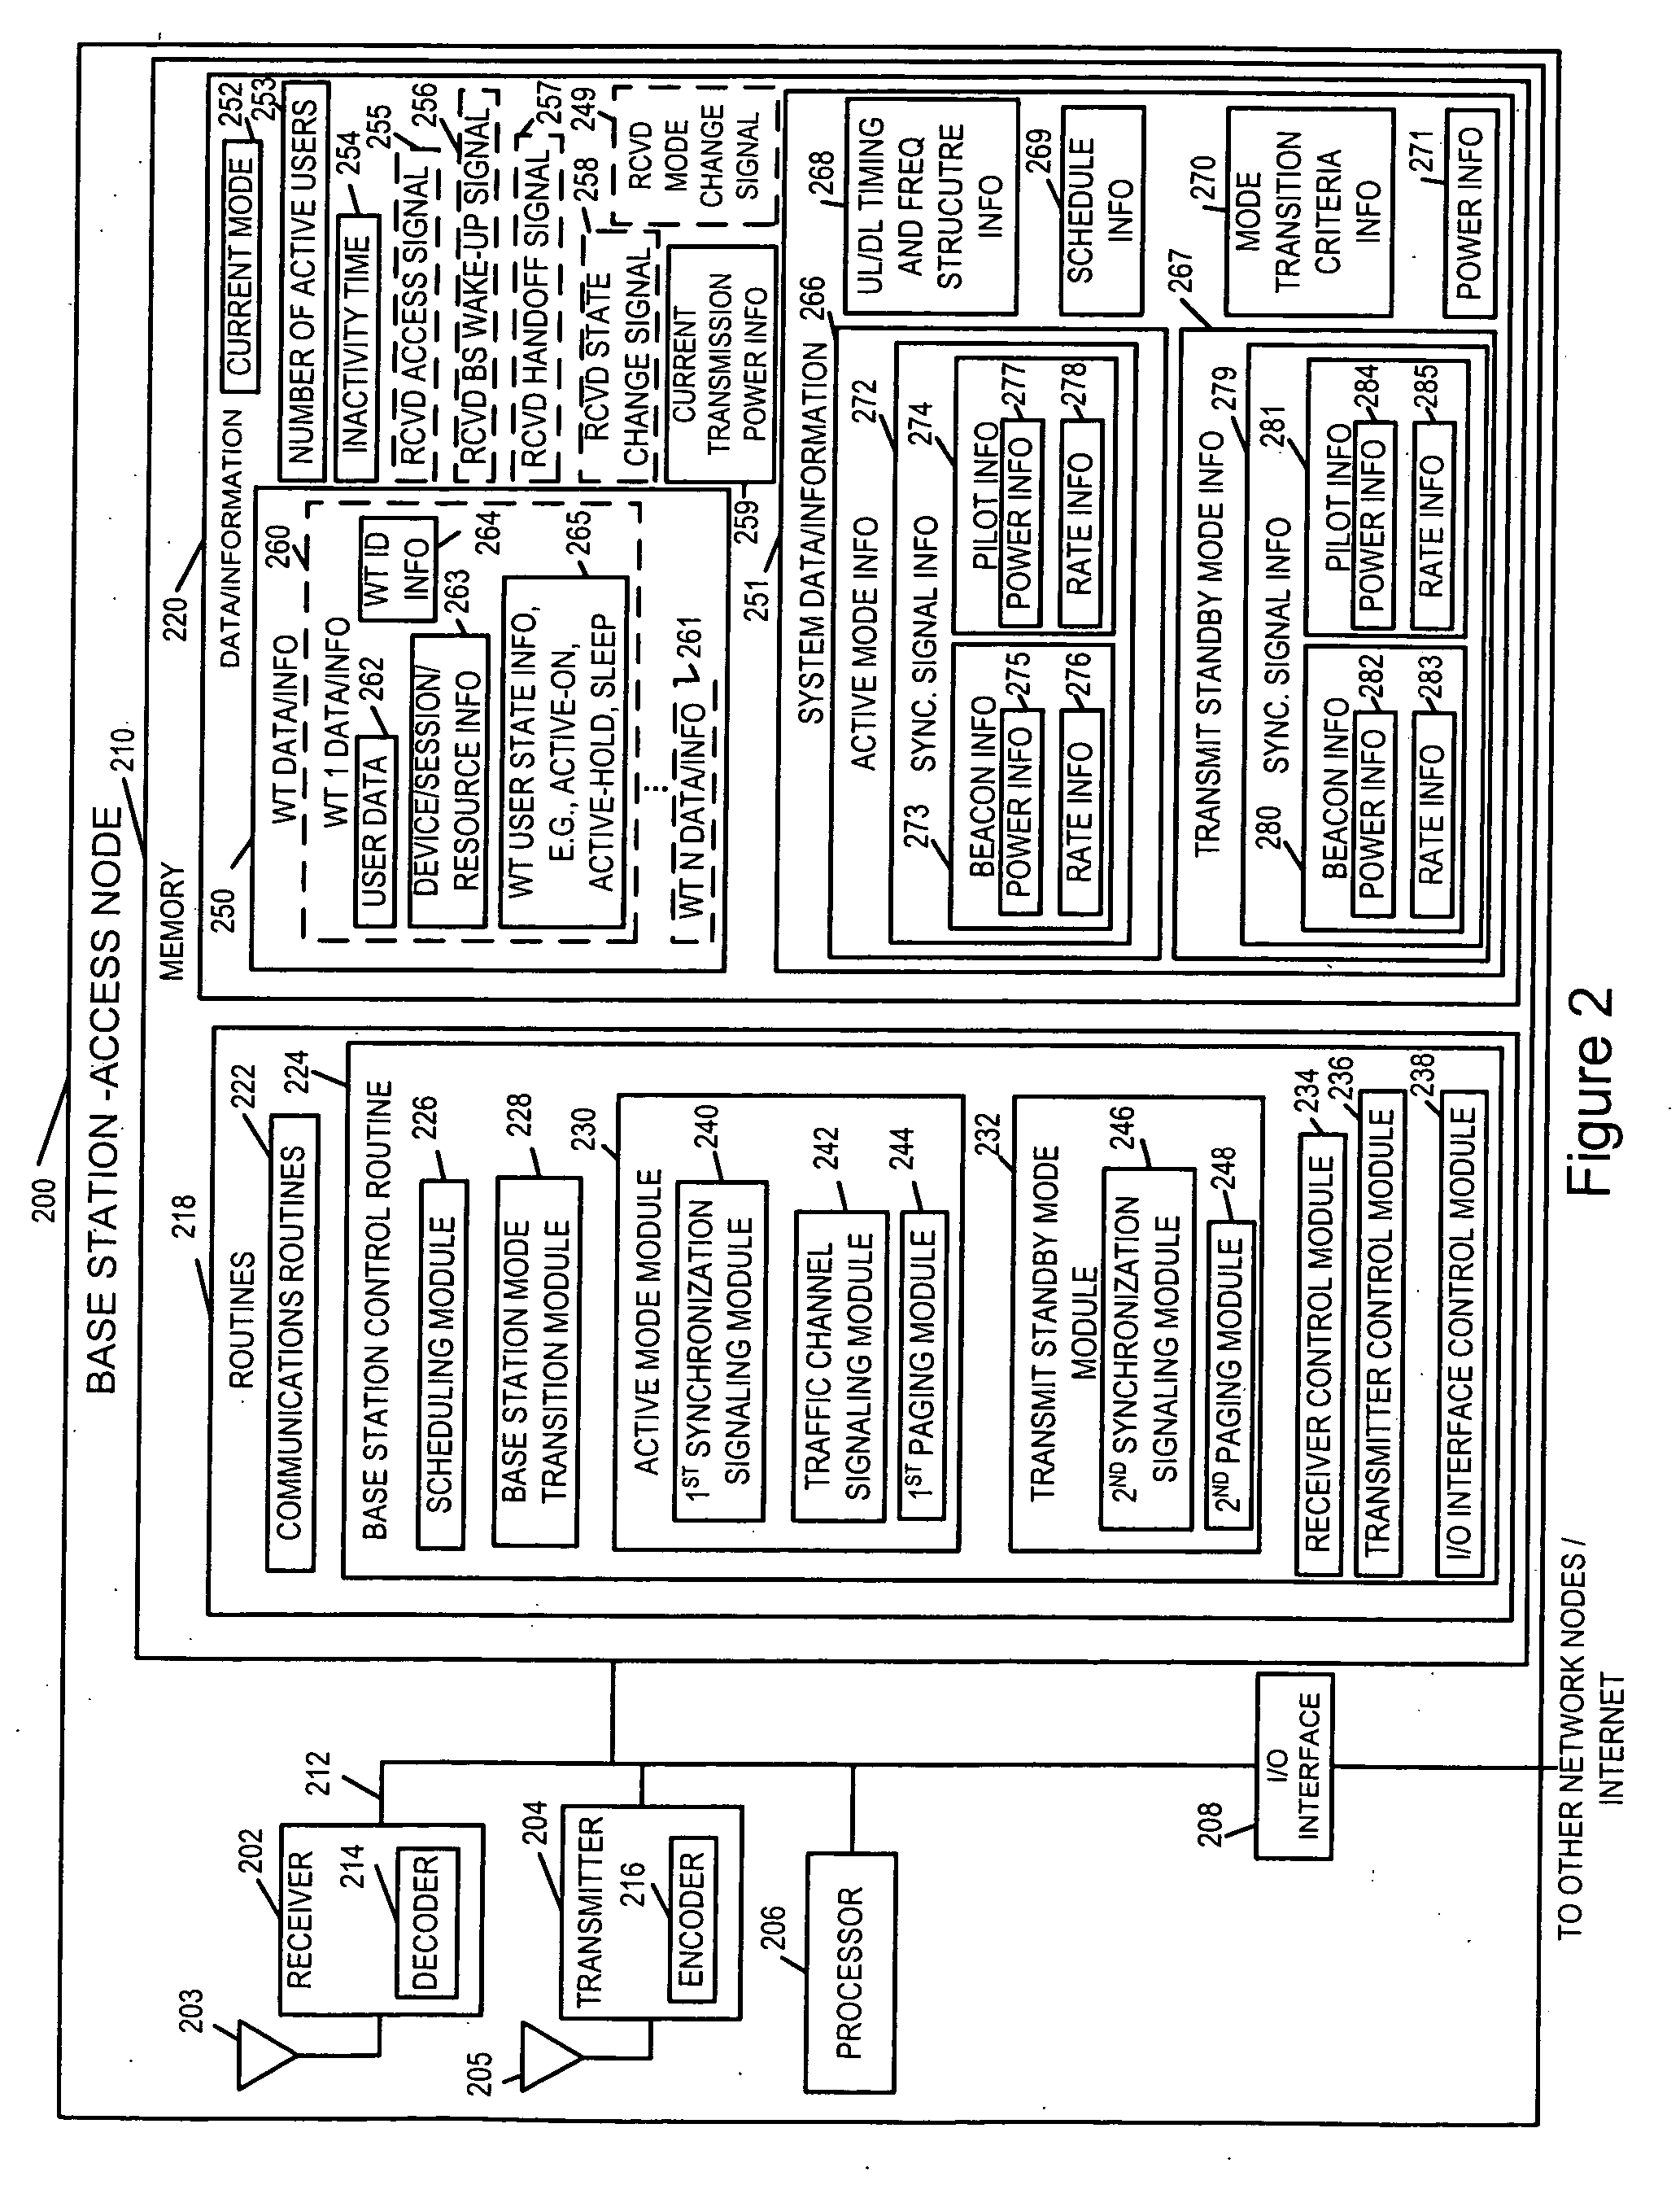 Methods and apparatus for use in a wireless communications system that uses a multi-mode base station